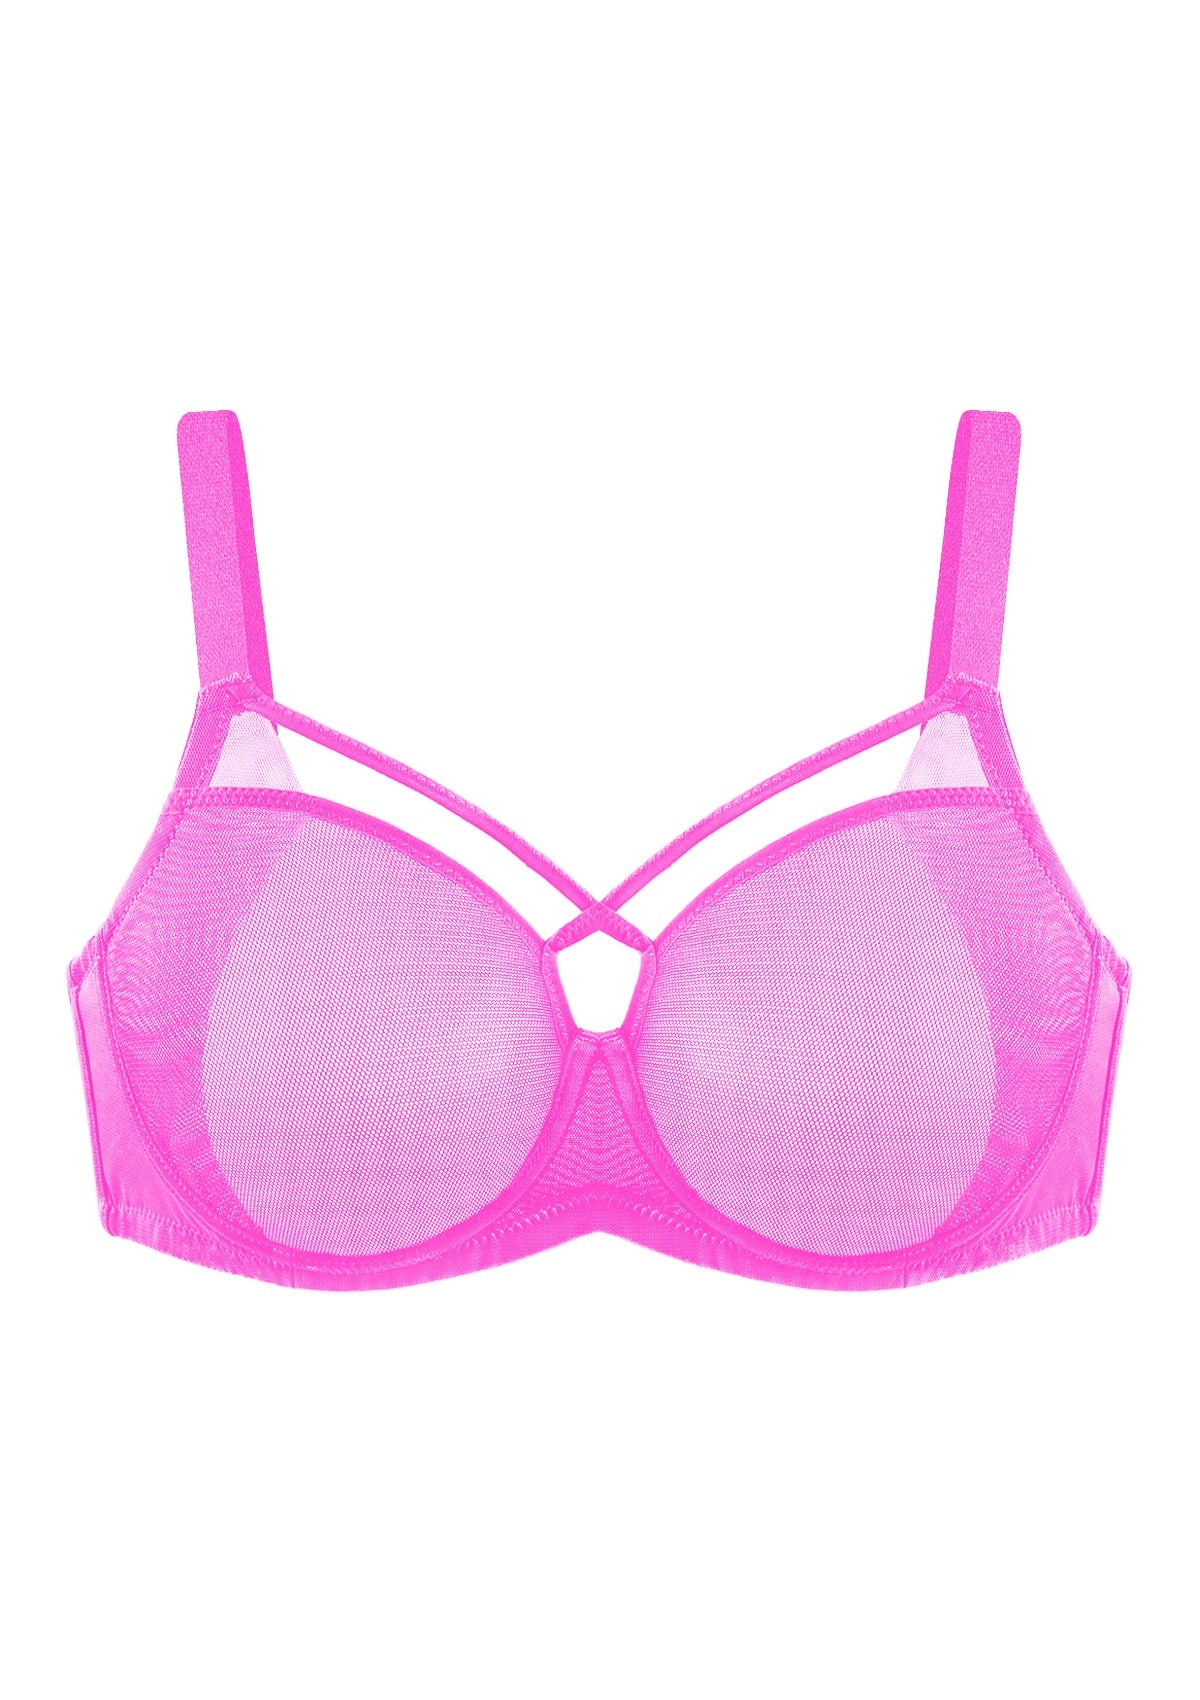 HSIA Billie Cross Front Strap Smooth Sheer Mesh Comfy Underwire Bra - Barbie Pink / 36 / D